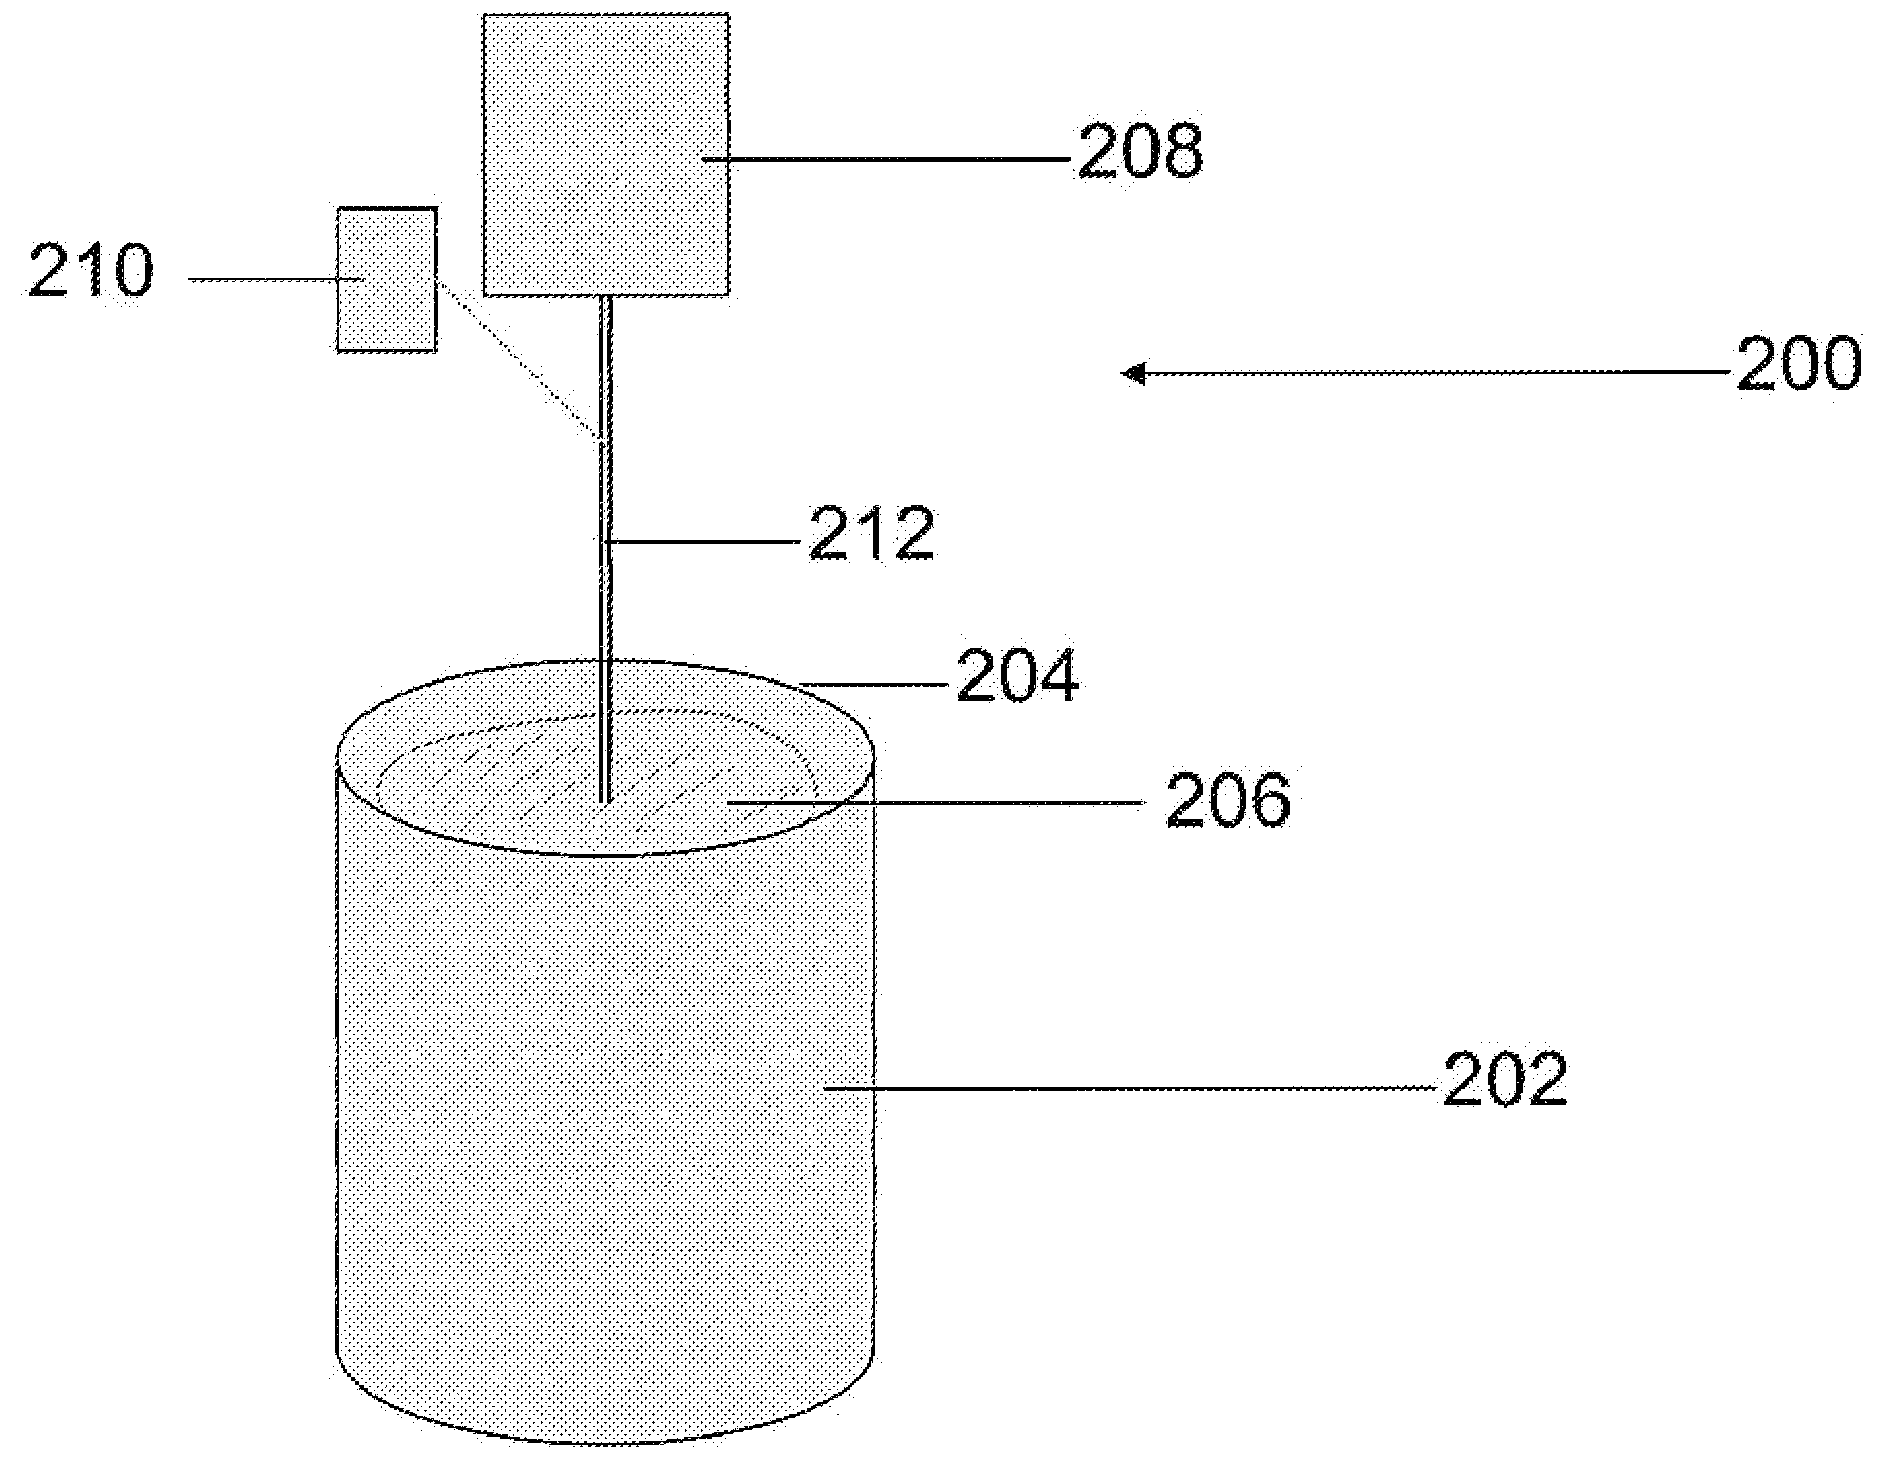 Method of manufacturing and testing monofilament and multi-filaments self-retaining sutures